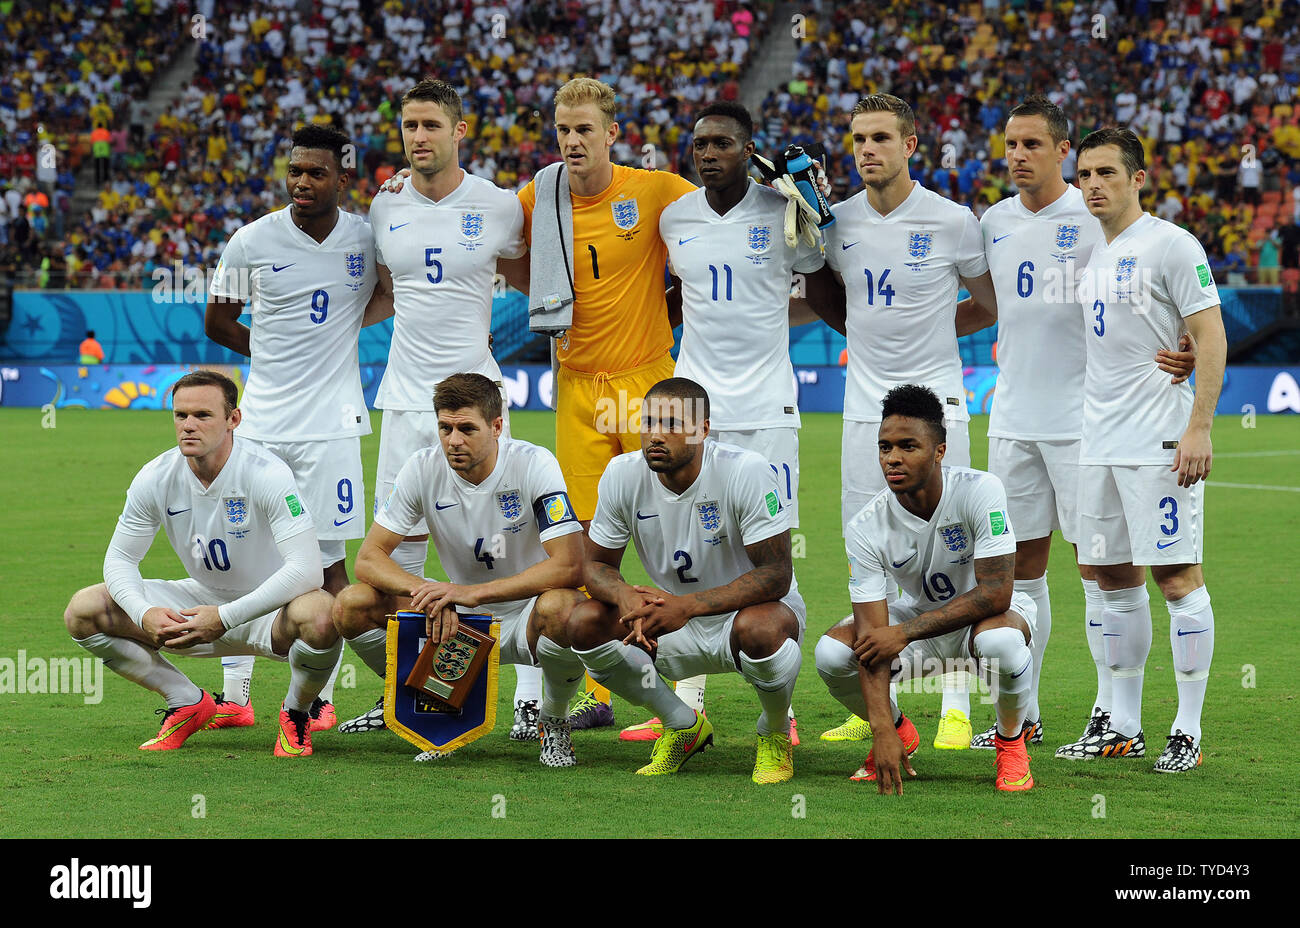 England pose for a team photograph ahead of the 2014 FIFA World Cup Group D  match at the Arena Amazonia in Manaus, Brazil on June 14, 2014. UPI/Chris  Brunskill Stock Photo - Alamy